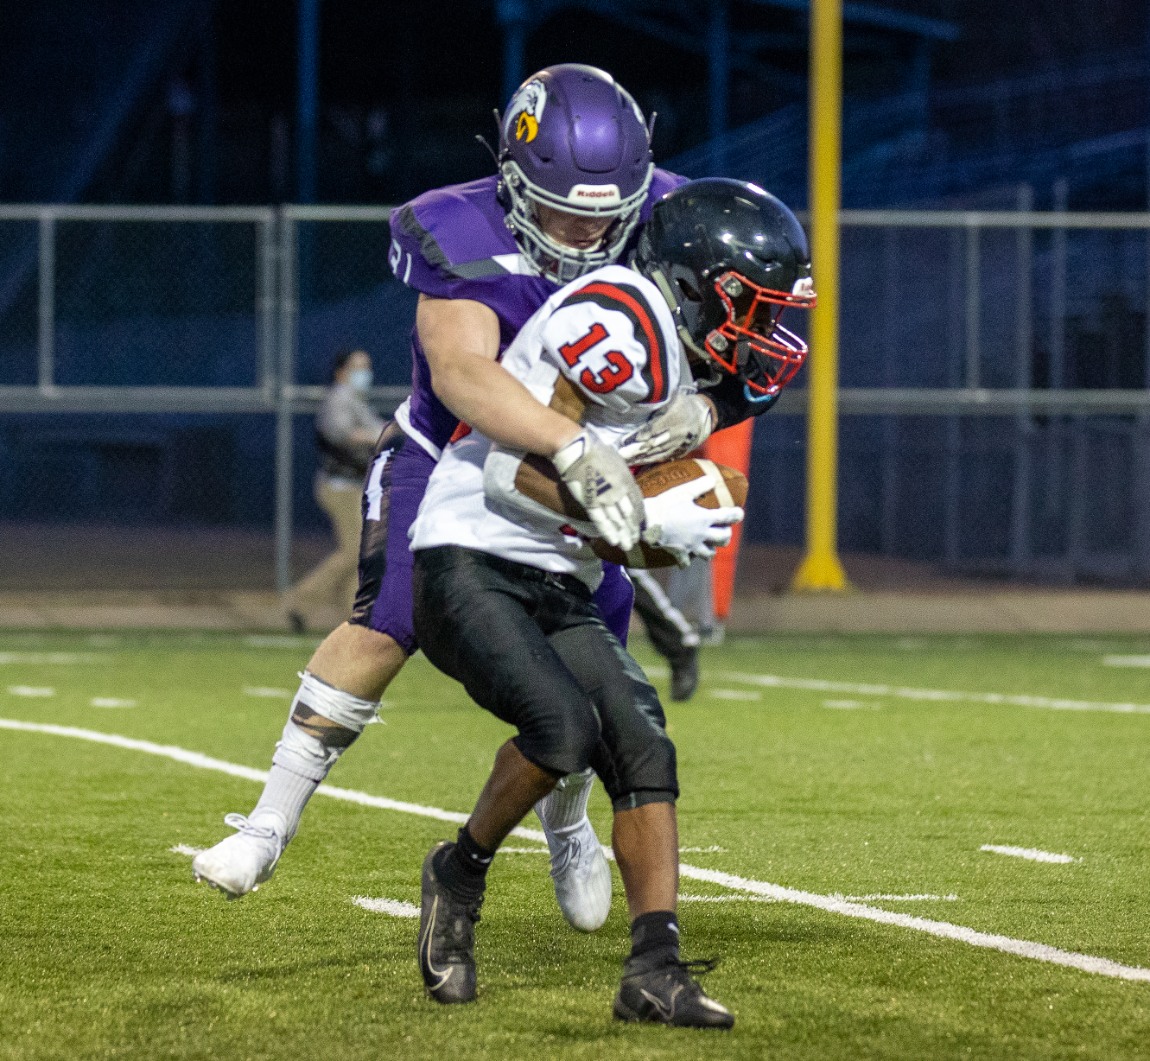 Eau-Claire-Memorial-JV-Football-LaCrosse-Central-at-Home-3-29-21-1710